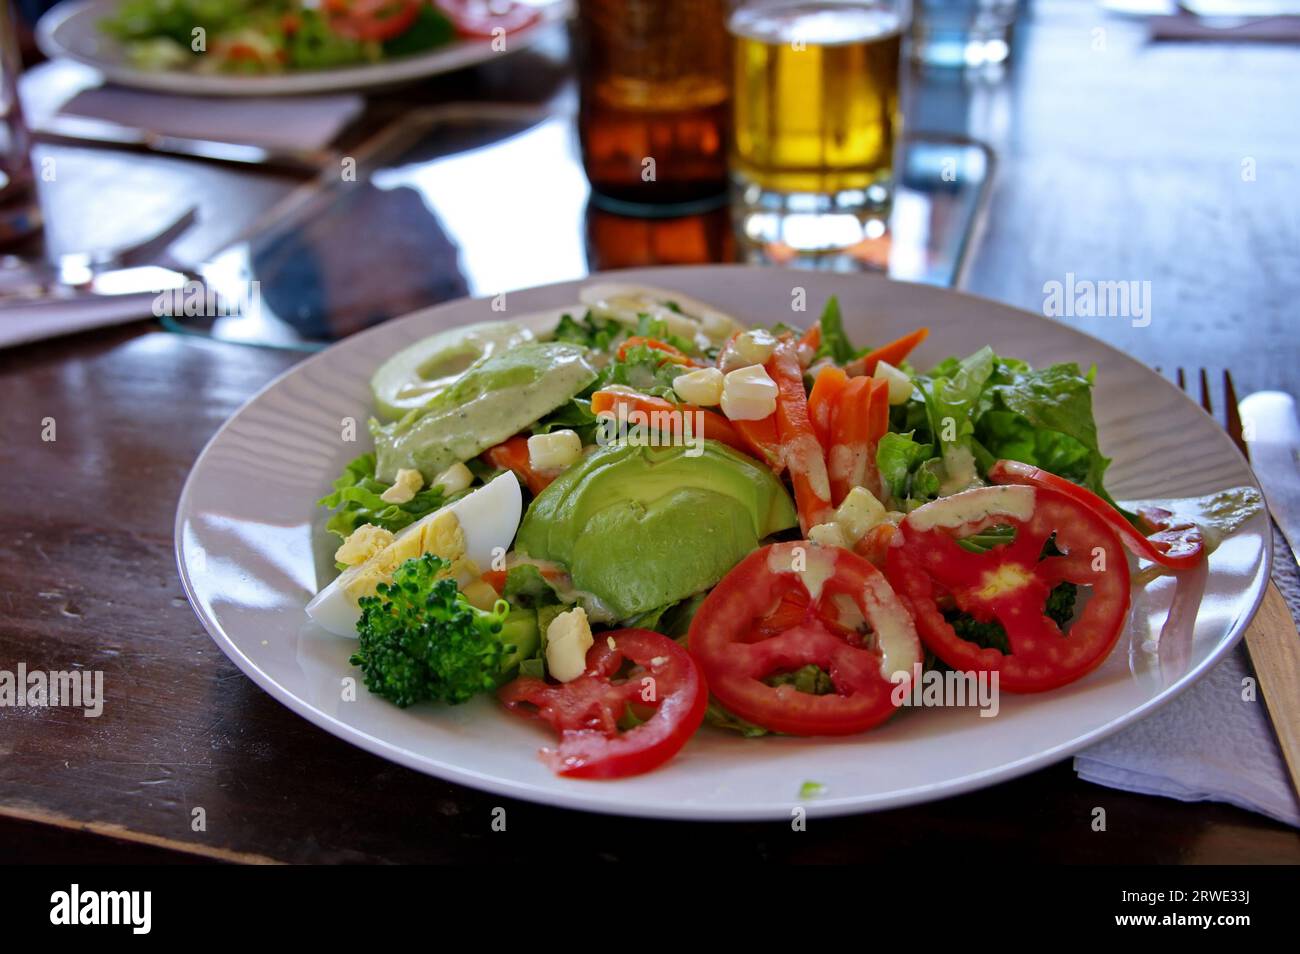 Mixed salad on the rustic wooden table Stock Photo